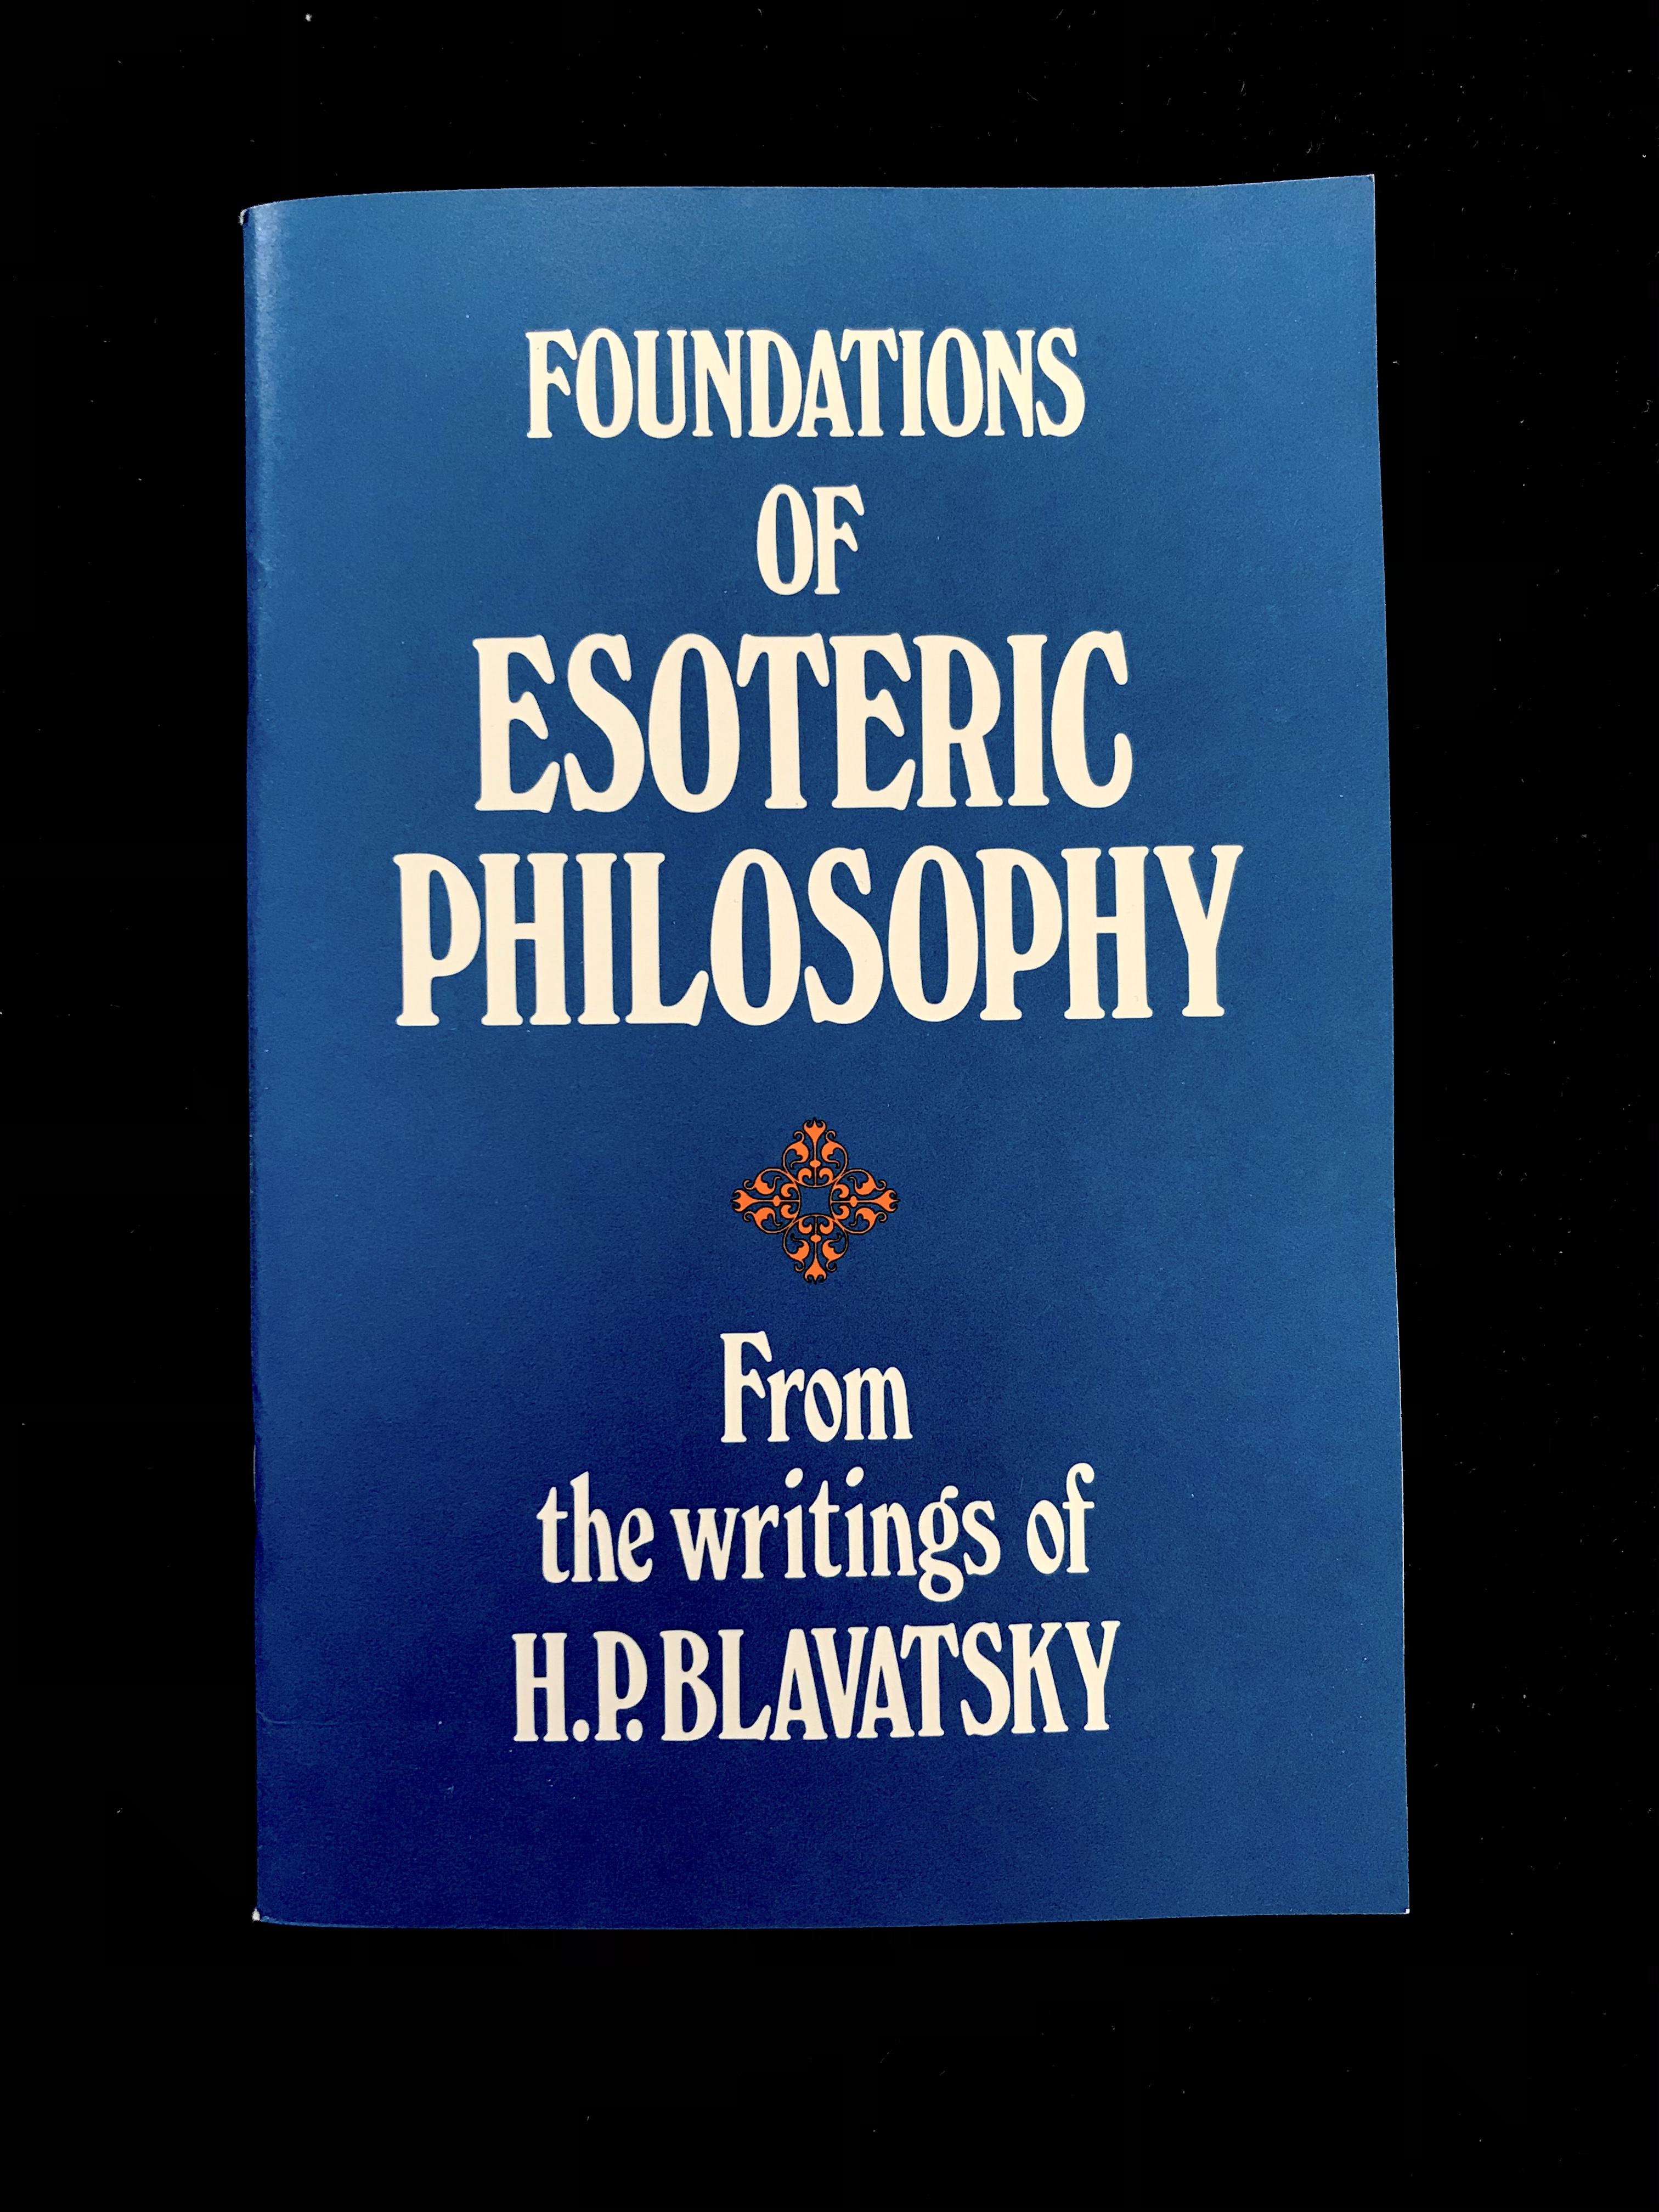 Foundations of Esoteric Philosophy From The Writings of H. P. Blavatsky